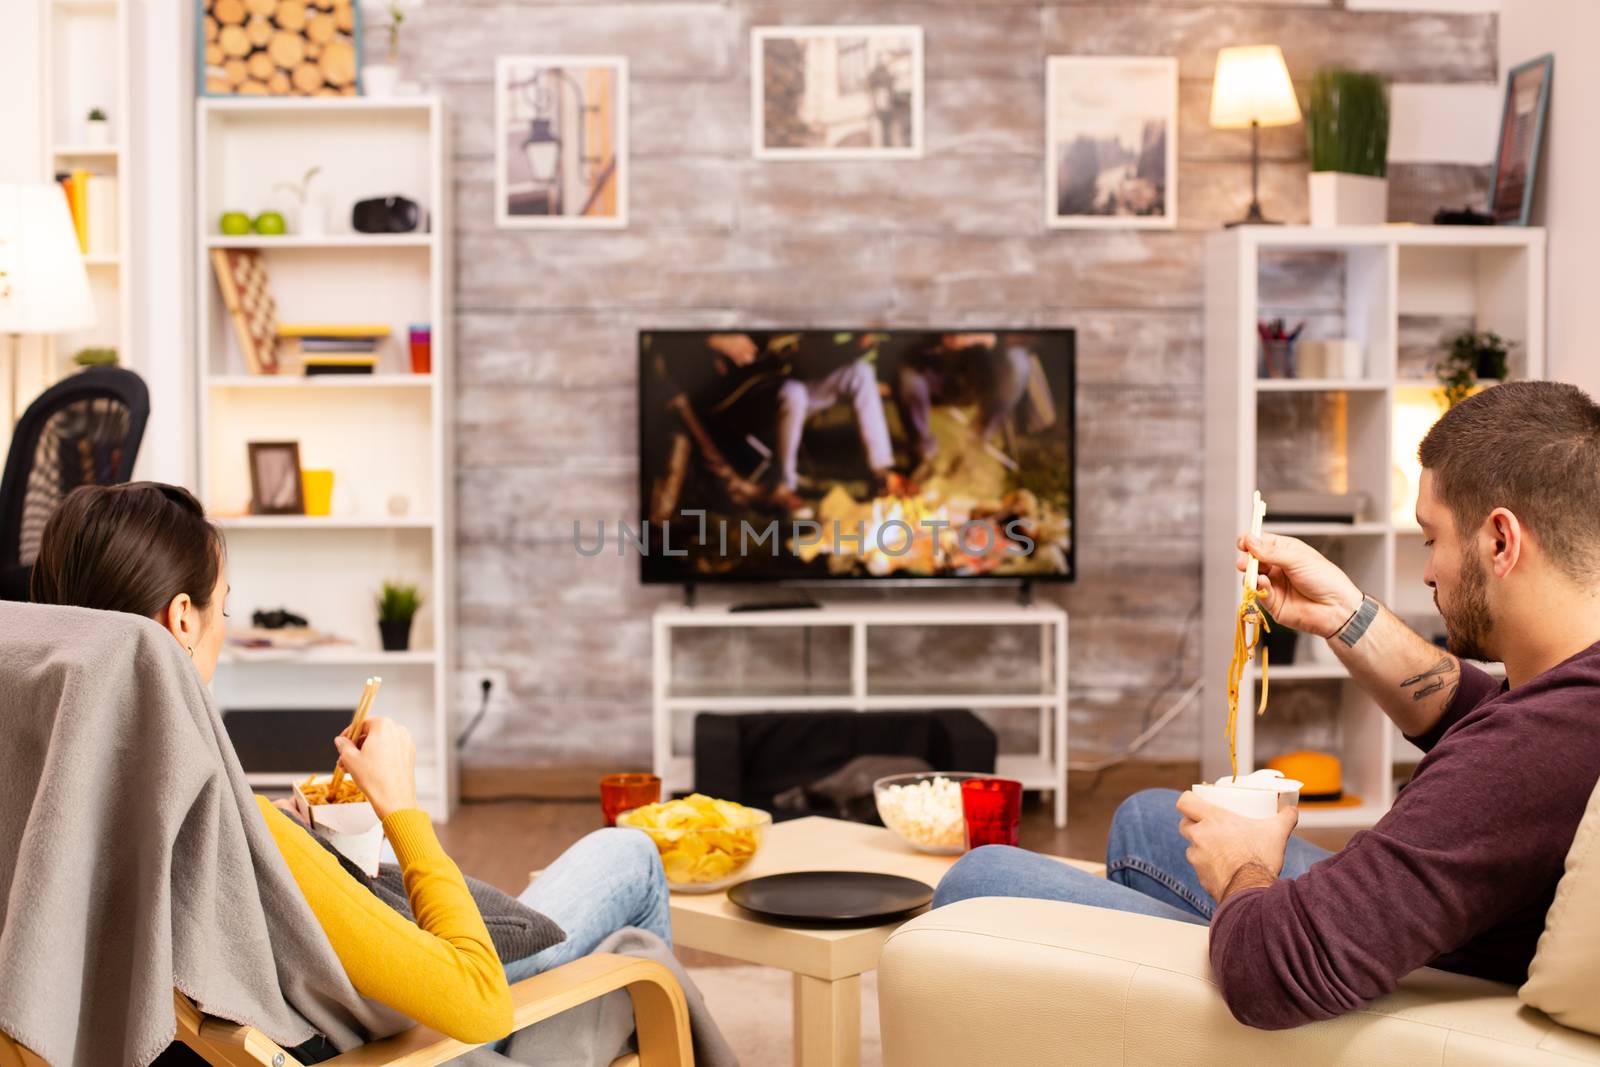 Back view of couple in living room watching a movie on the TV while eating takeaway food